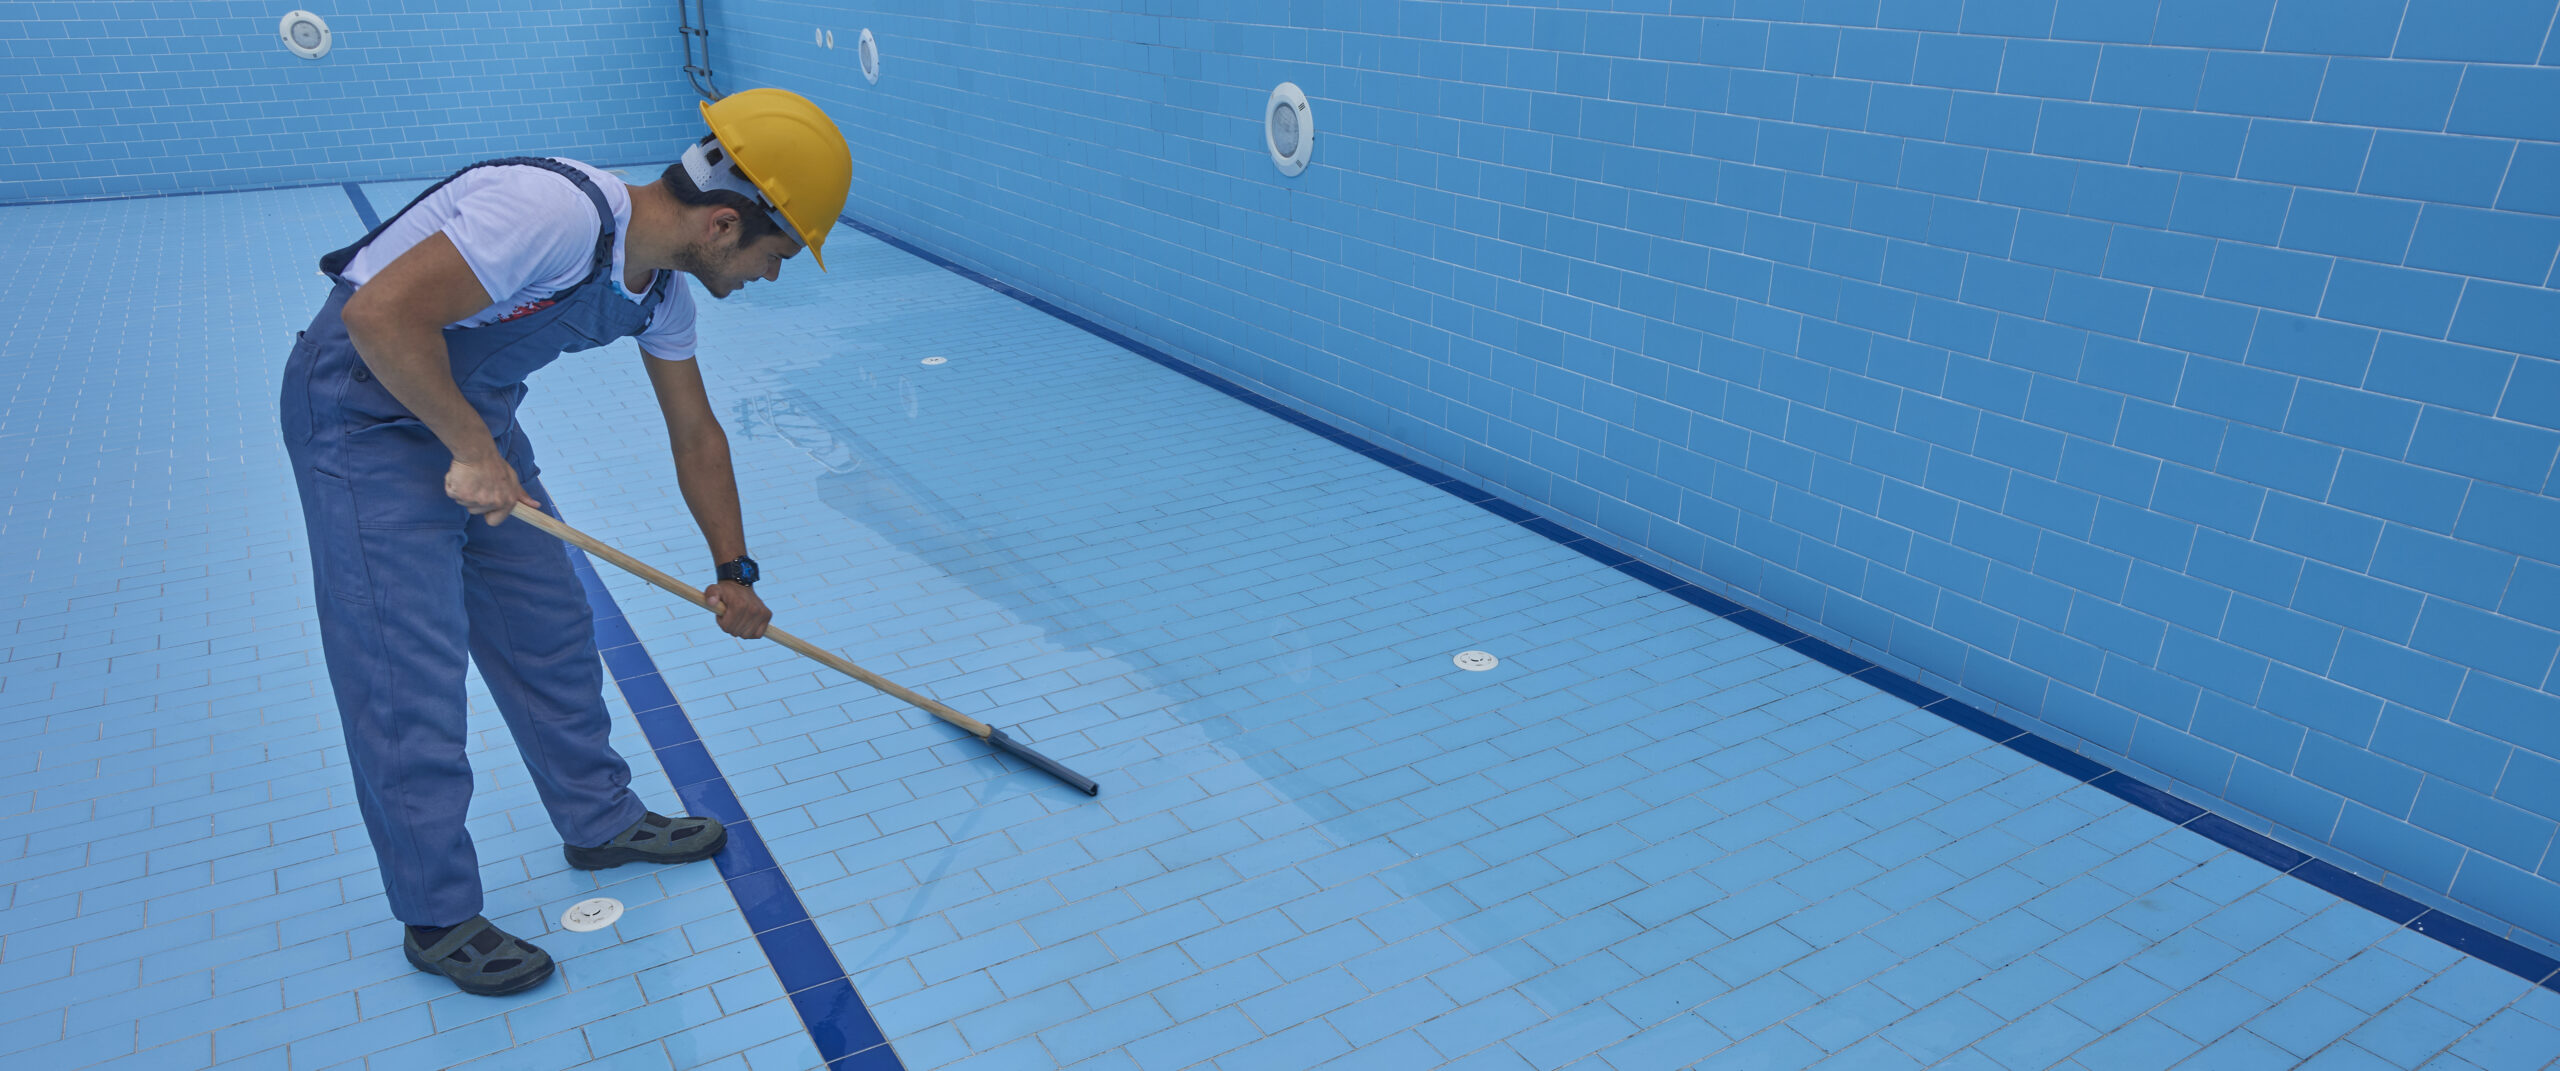 A man scrubbing tiles in a swimming pool, ensuring they remain clean and free of algae and debris.